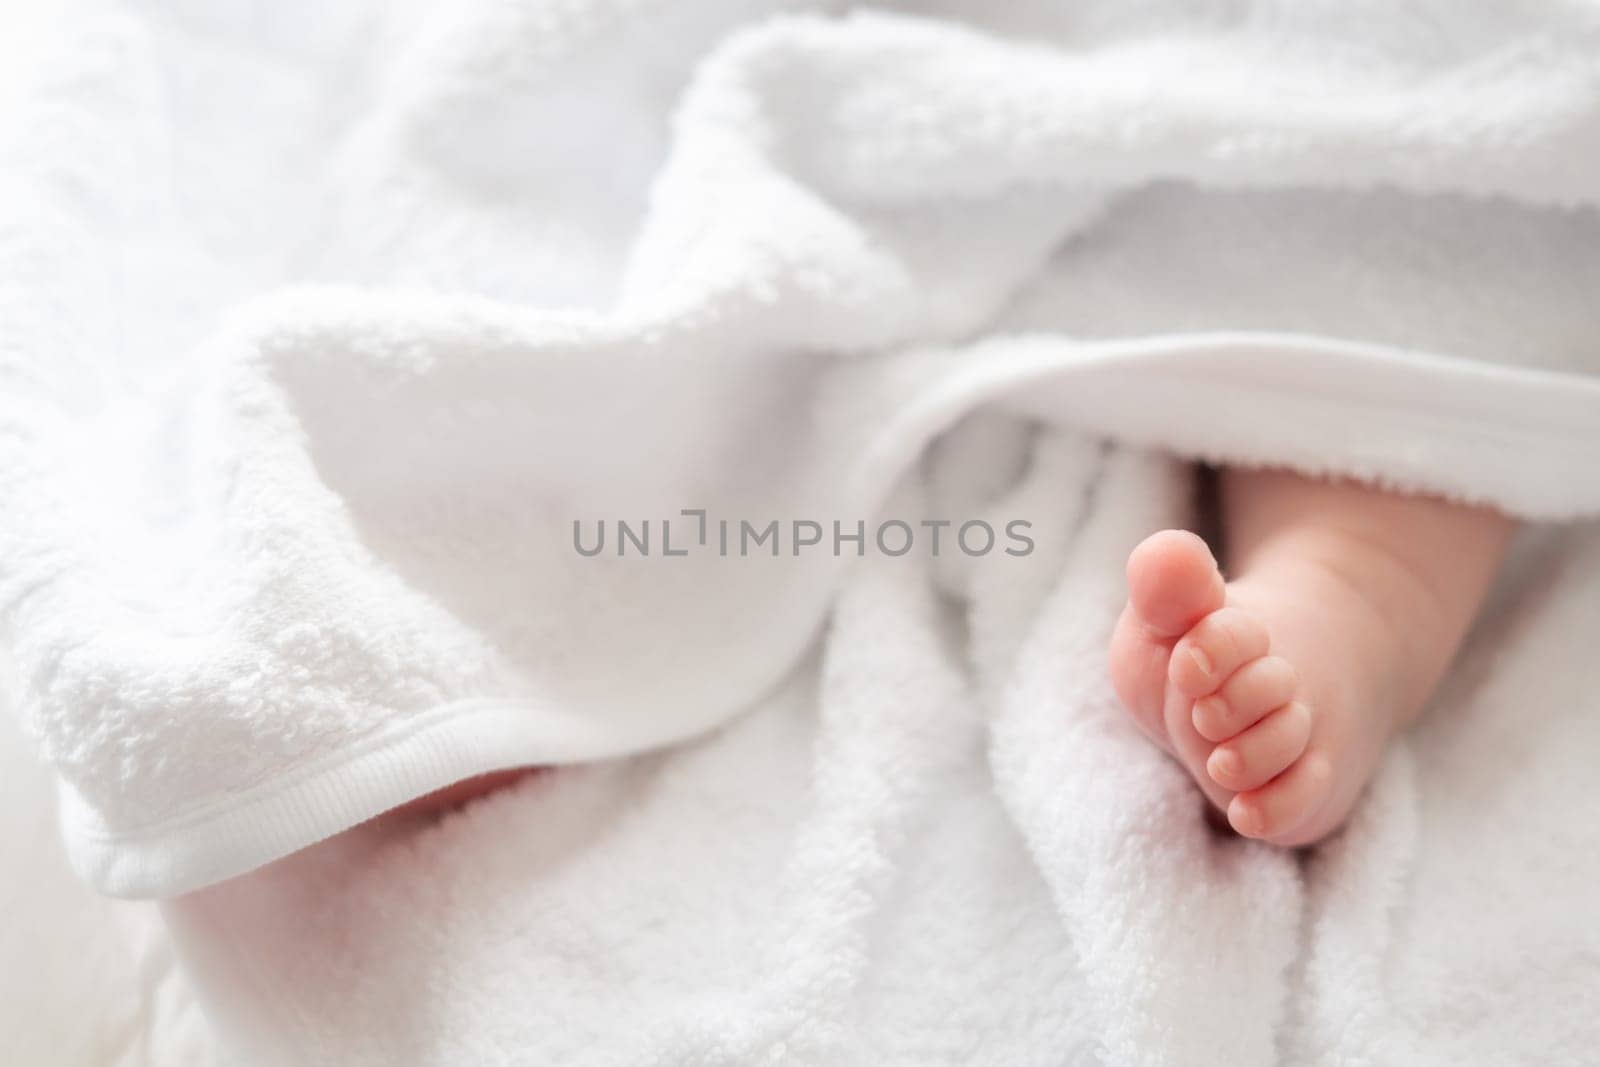 A heart-touching portrayal of pure innocence as a newborn baby's foot tenderly peeks out from a soft white towel